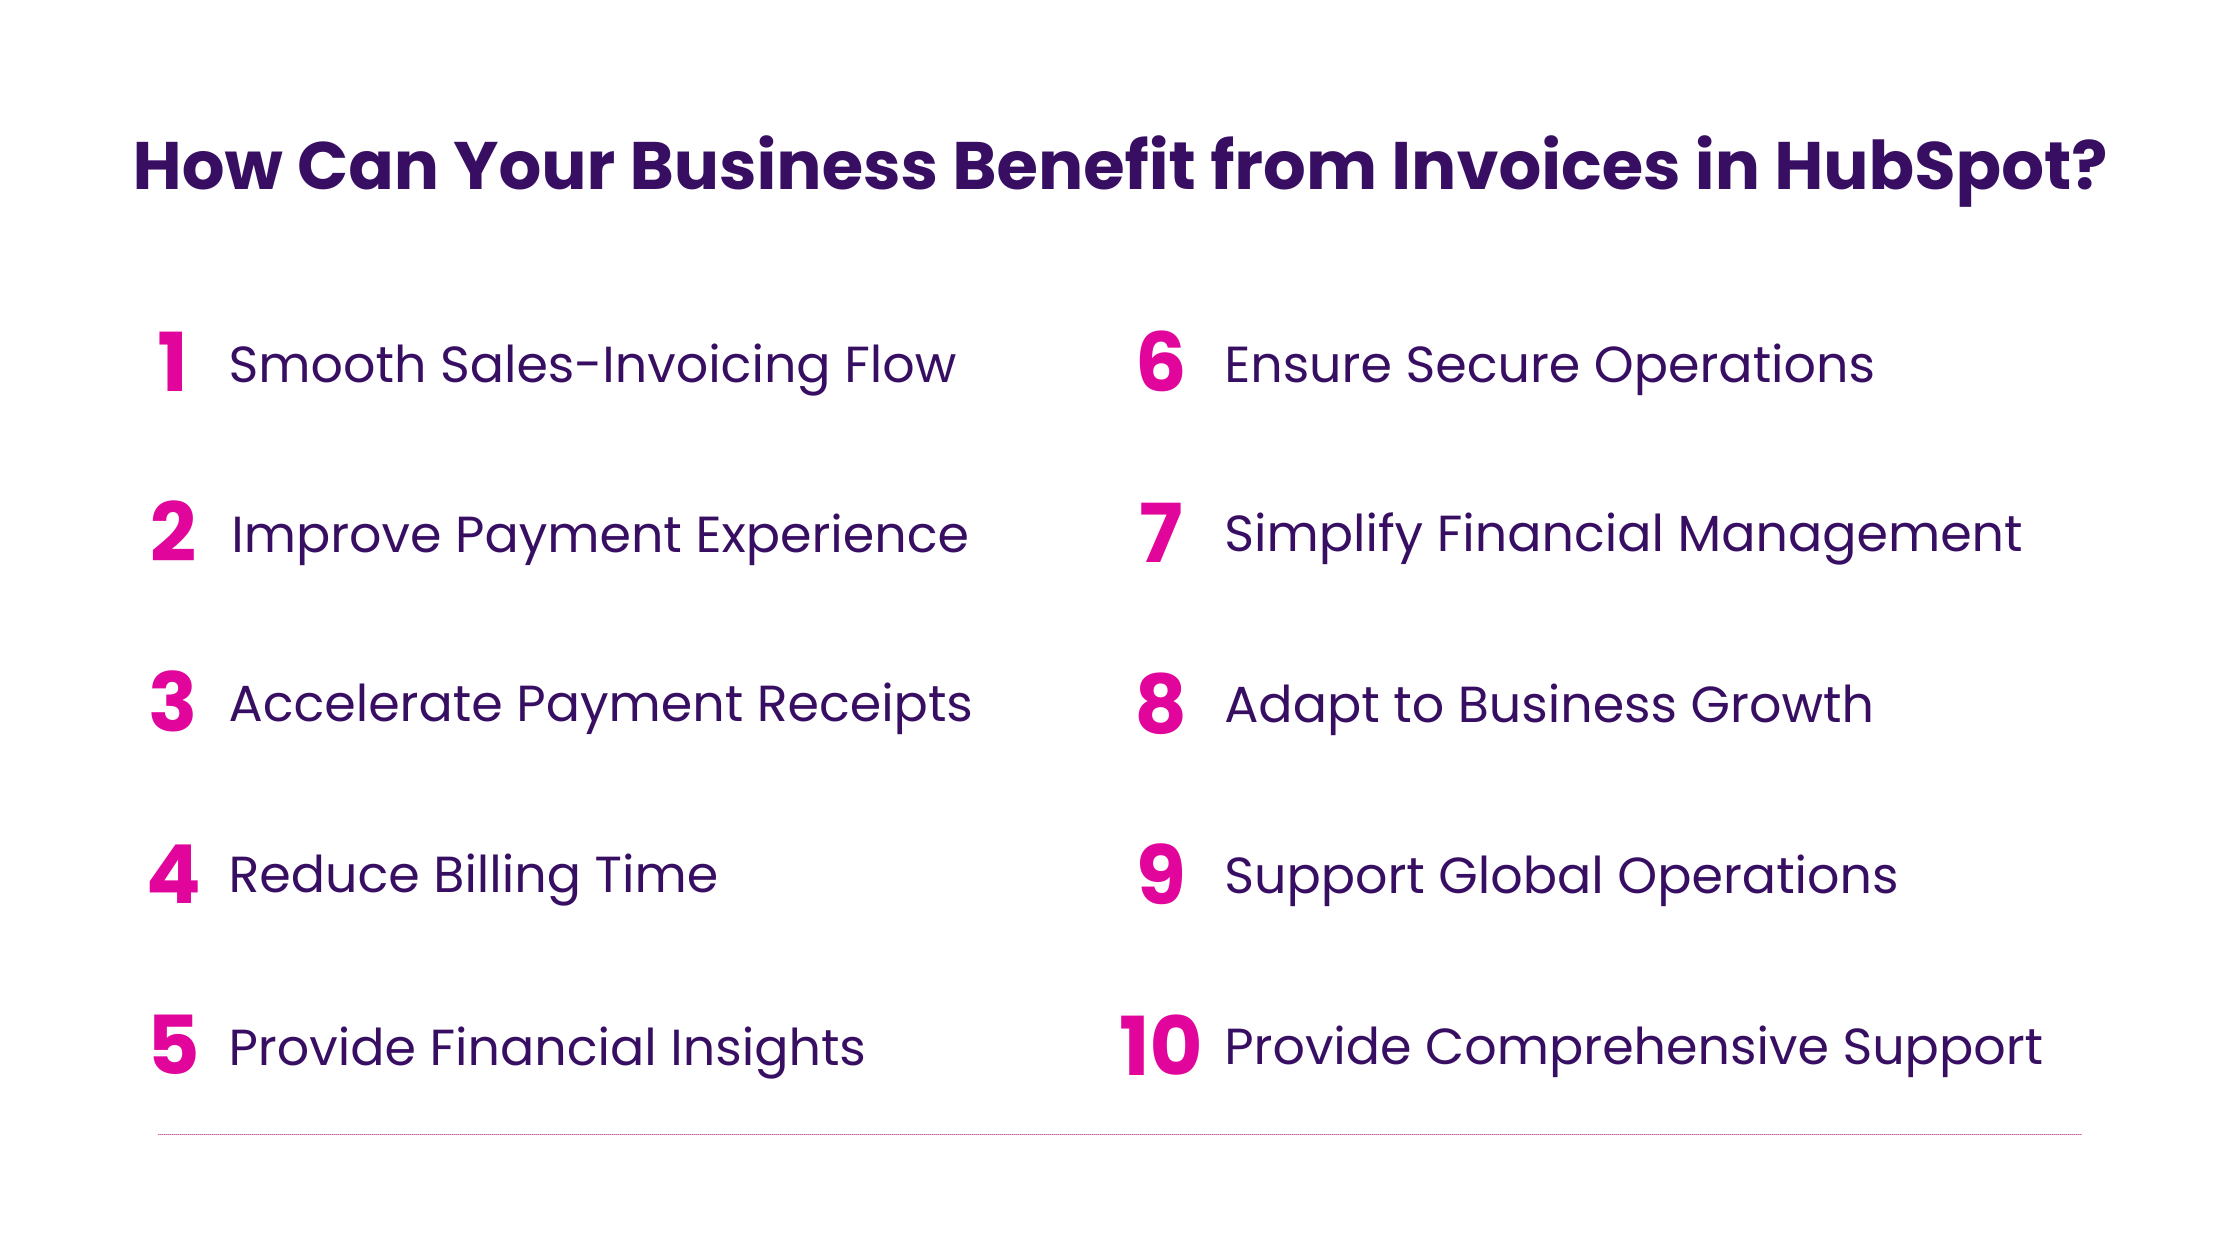 How Can Your Business Benefit from Invoices in HubSpot